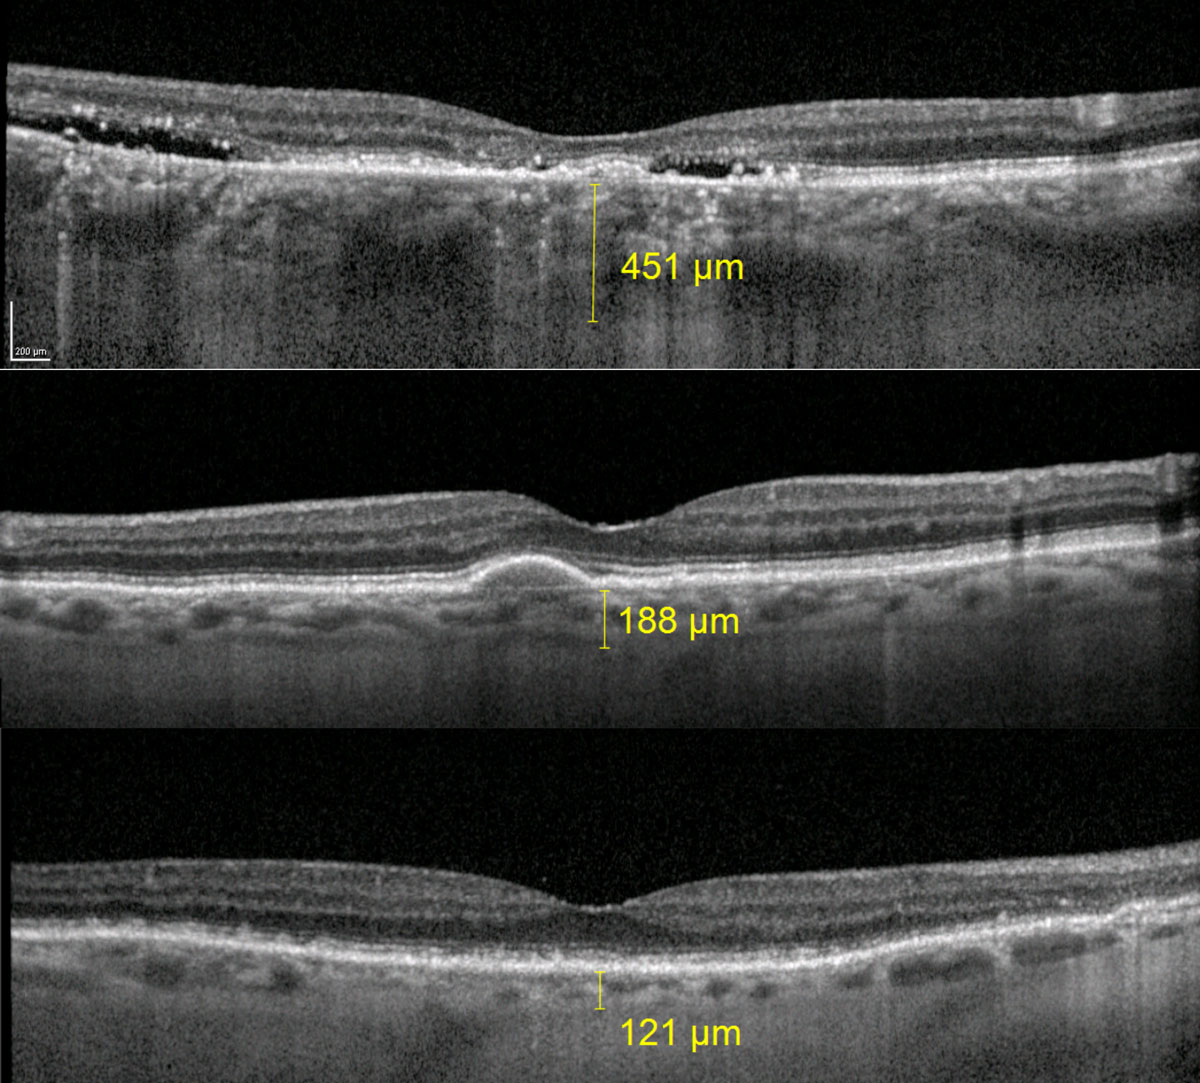 Fig. 6. The top image is a patient with chronic central serous retinopathy and subfoveal choroidal thickness measuring 451µm. The middle image is a patient with large drusen from AMD and subfoveal choroidal thickness of 188µm. The bottom image is a patient with RPD and subfoveal choroidal thickness of 121µm. 